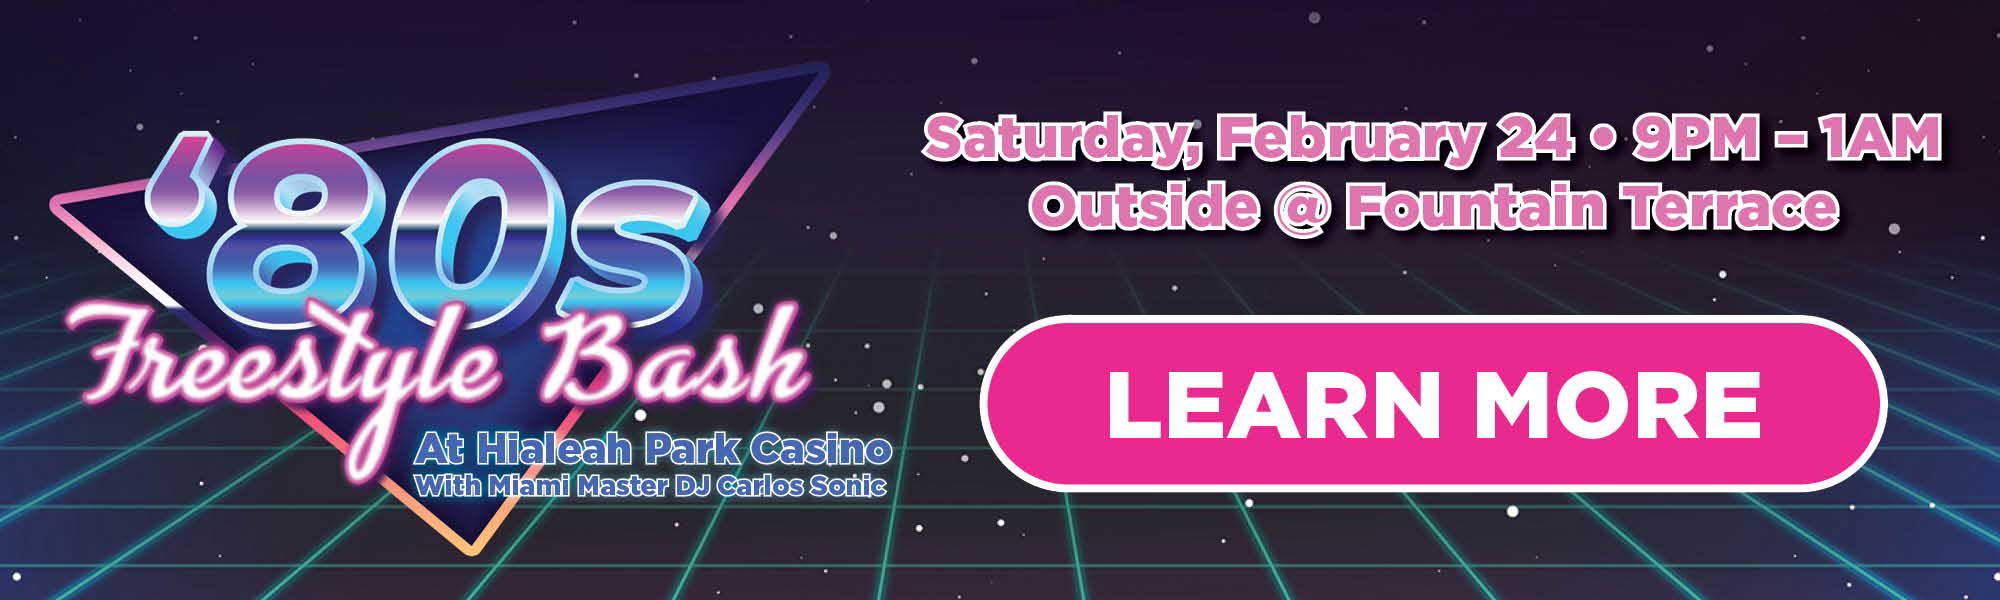 80s Freestyle Bash at Hialeah Park Casino with Miami Master DJ Carlos Sonic